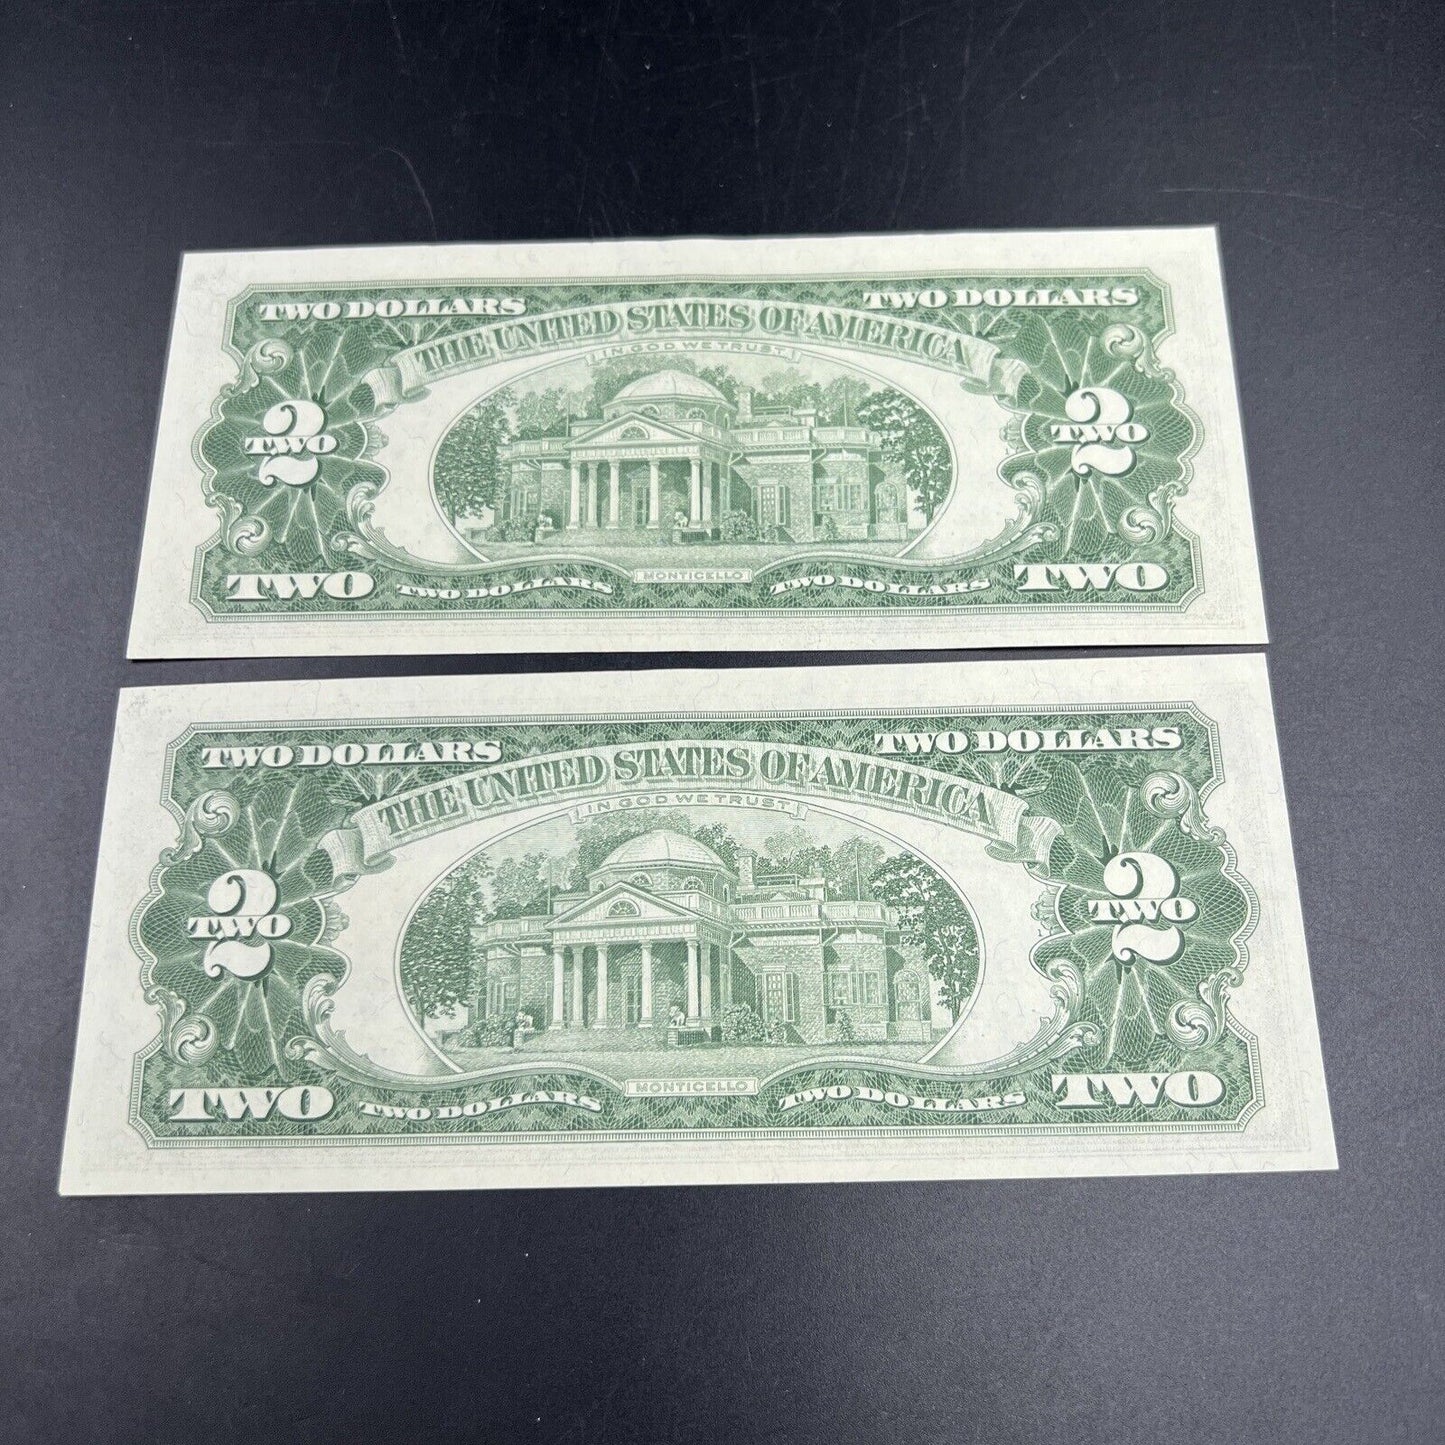 2 Consecutive 1963 $2 Two Dollar Red Seal Legal Tender Note Bills CH UNC #056